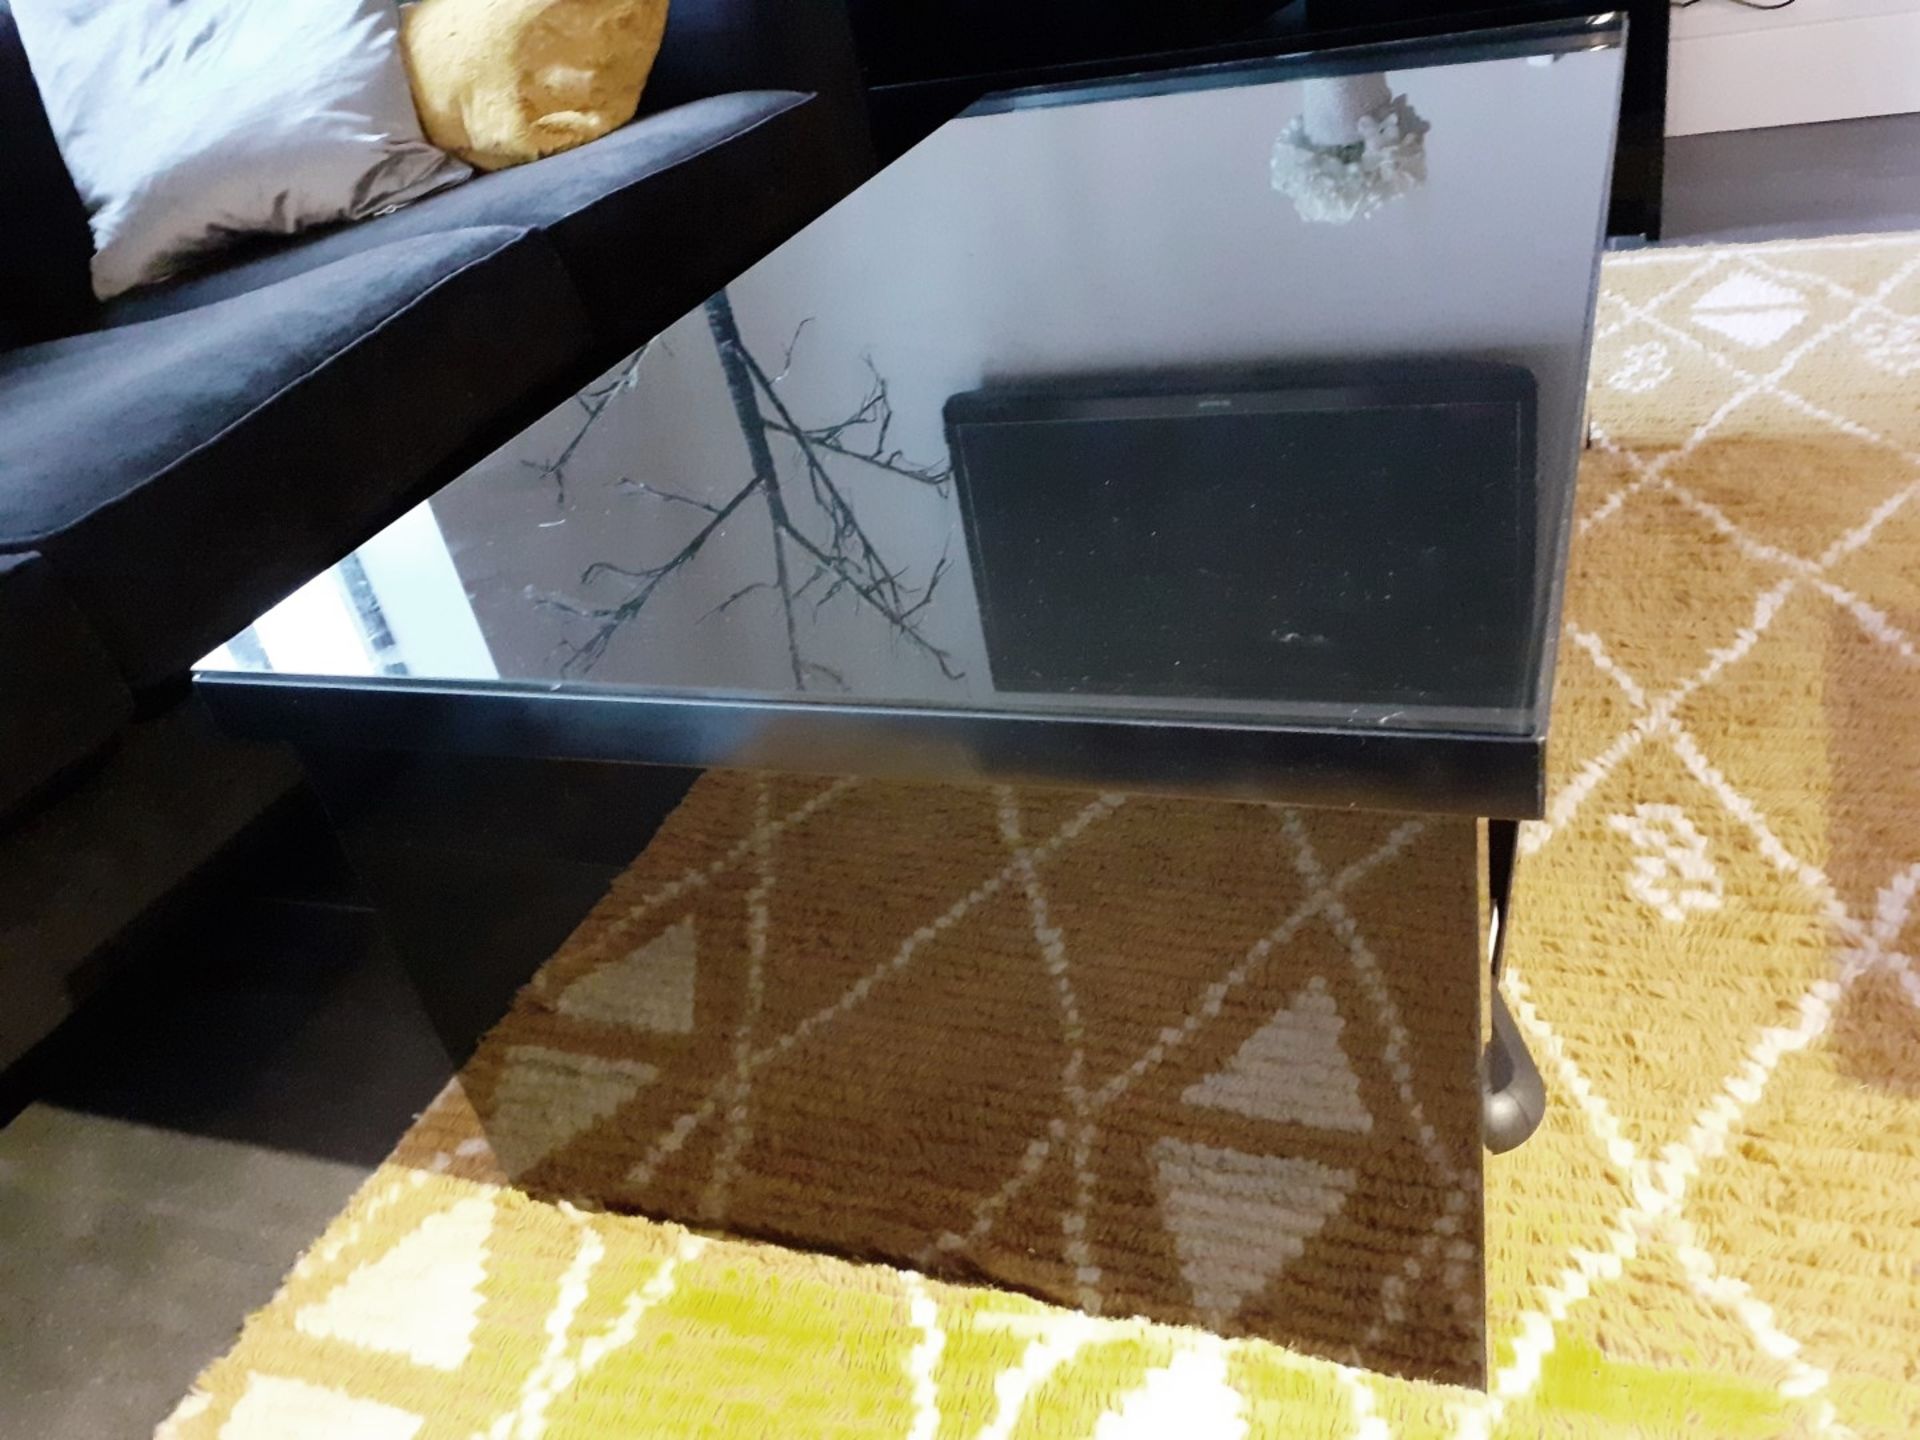 1 x Glass Topped Coffee Table With A Black Gloss Finish - Dimensions: 120 x 65 x H42cm - NO VAT - Image 5 of 5